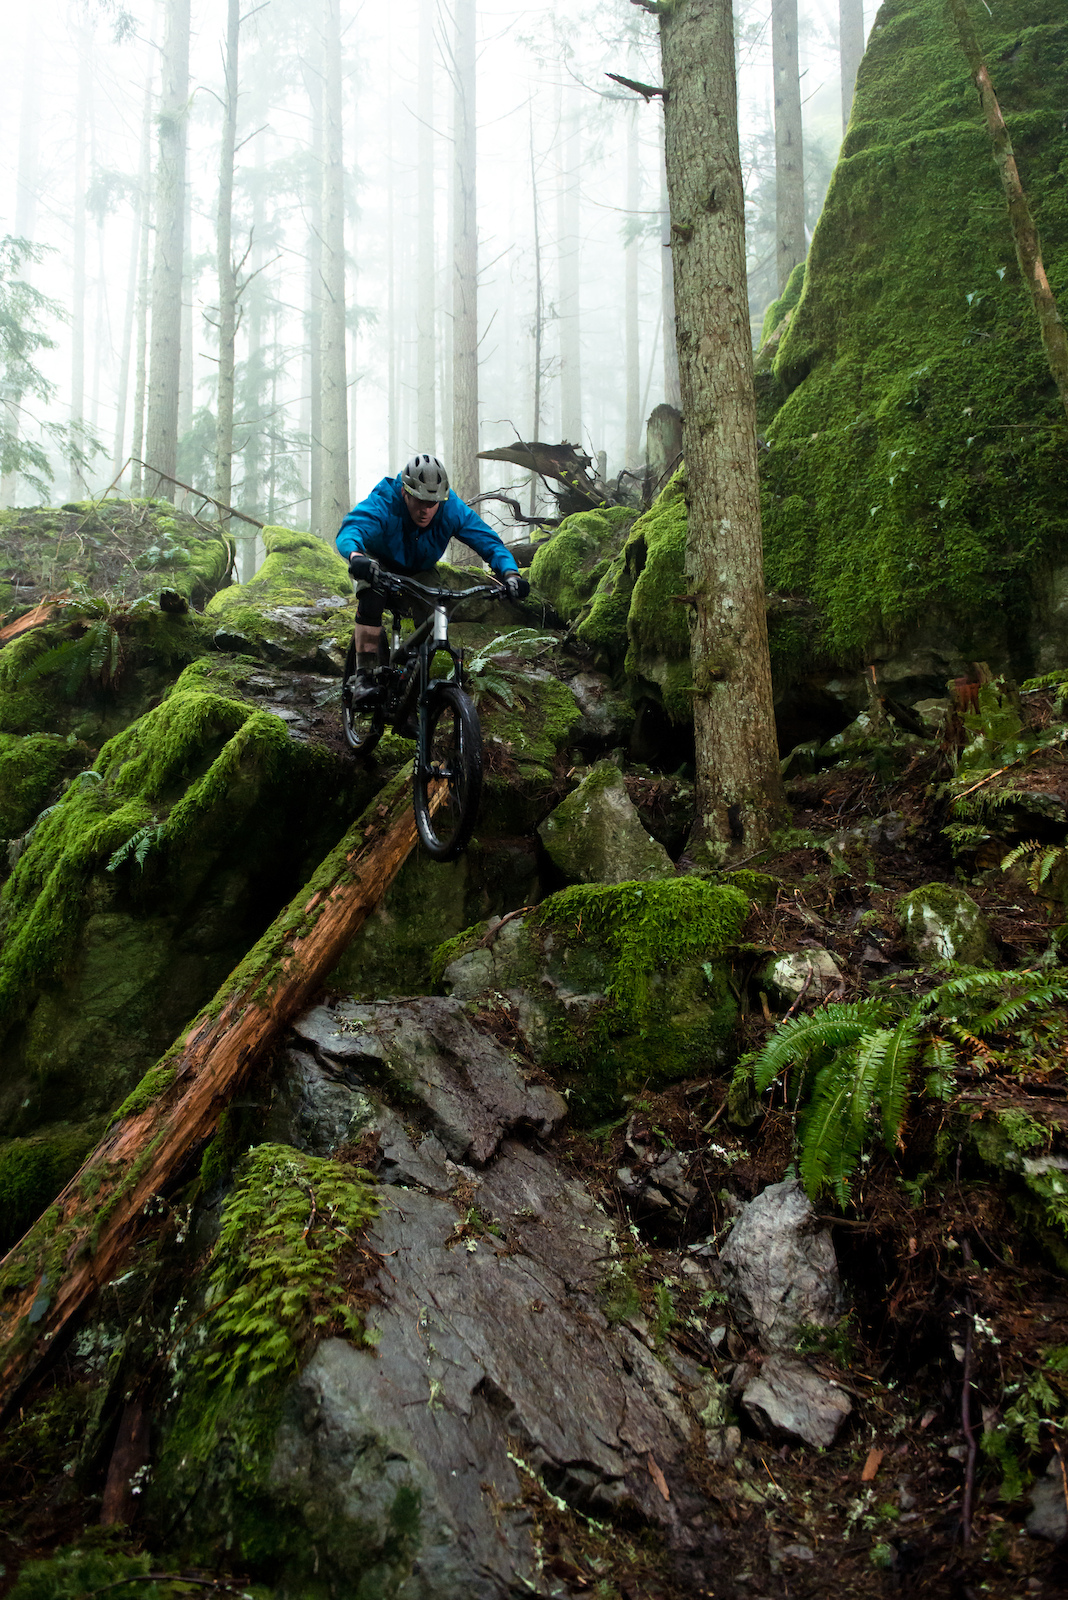 Self-built, self-shot. Always looking for fresh lines in the PNW jungle. Perfectly wet, foggy day!